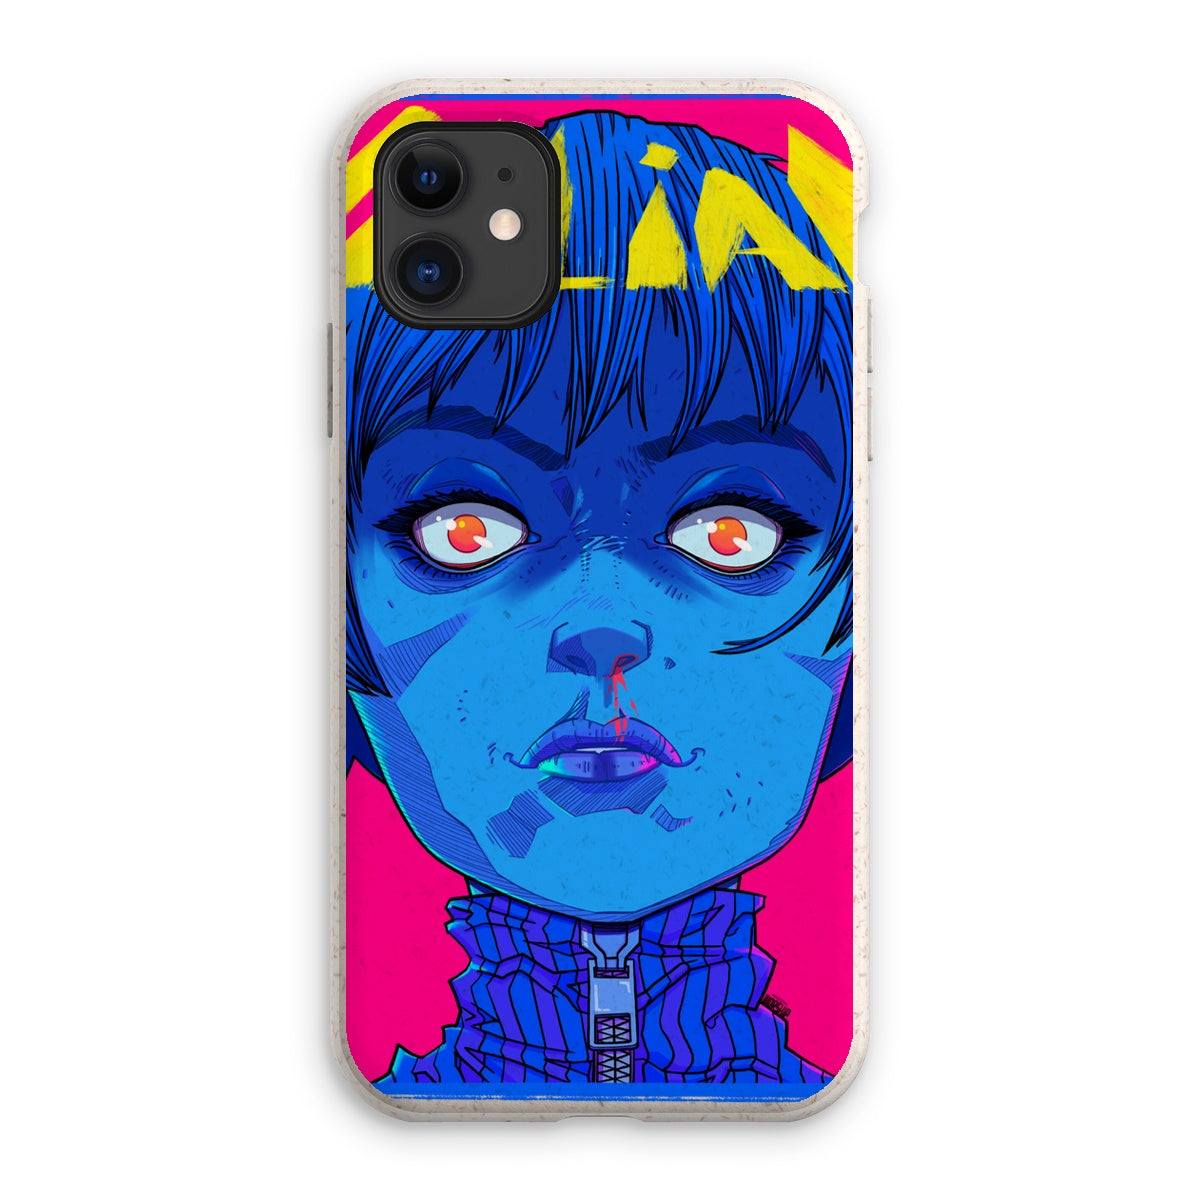 Unique and cool anime phone case illustration